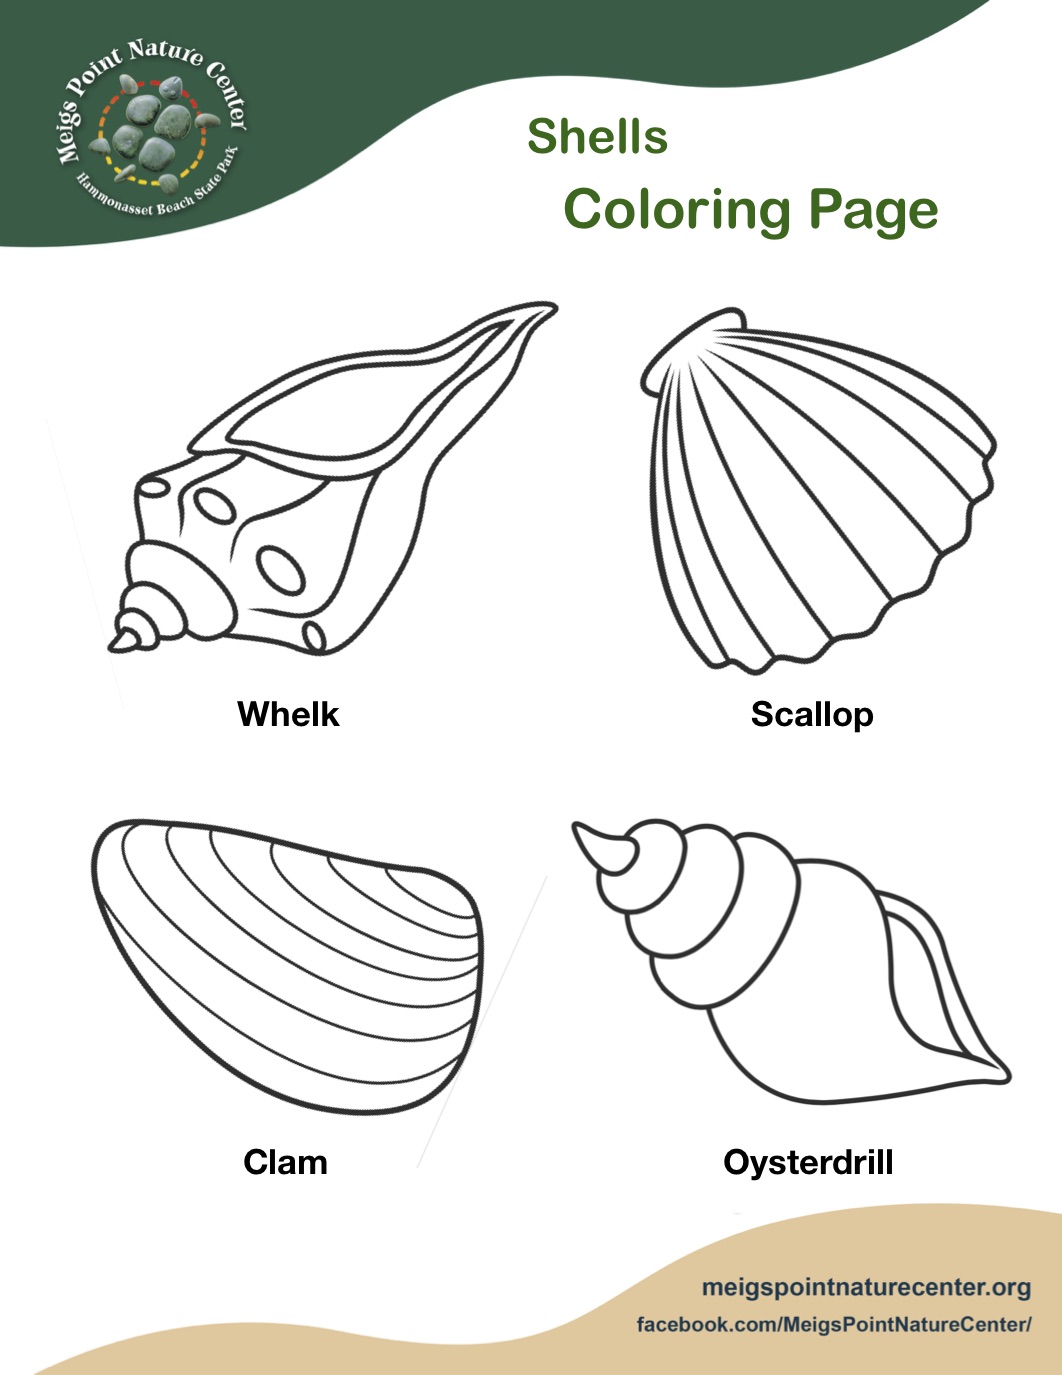 Shells coloring page